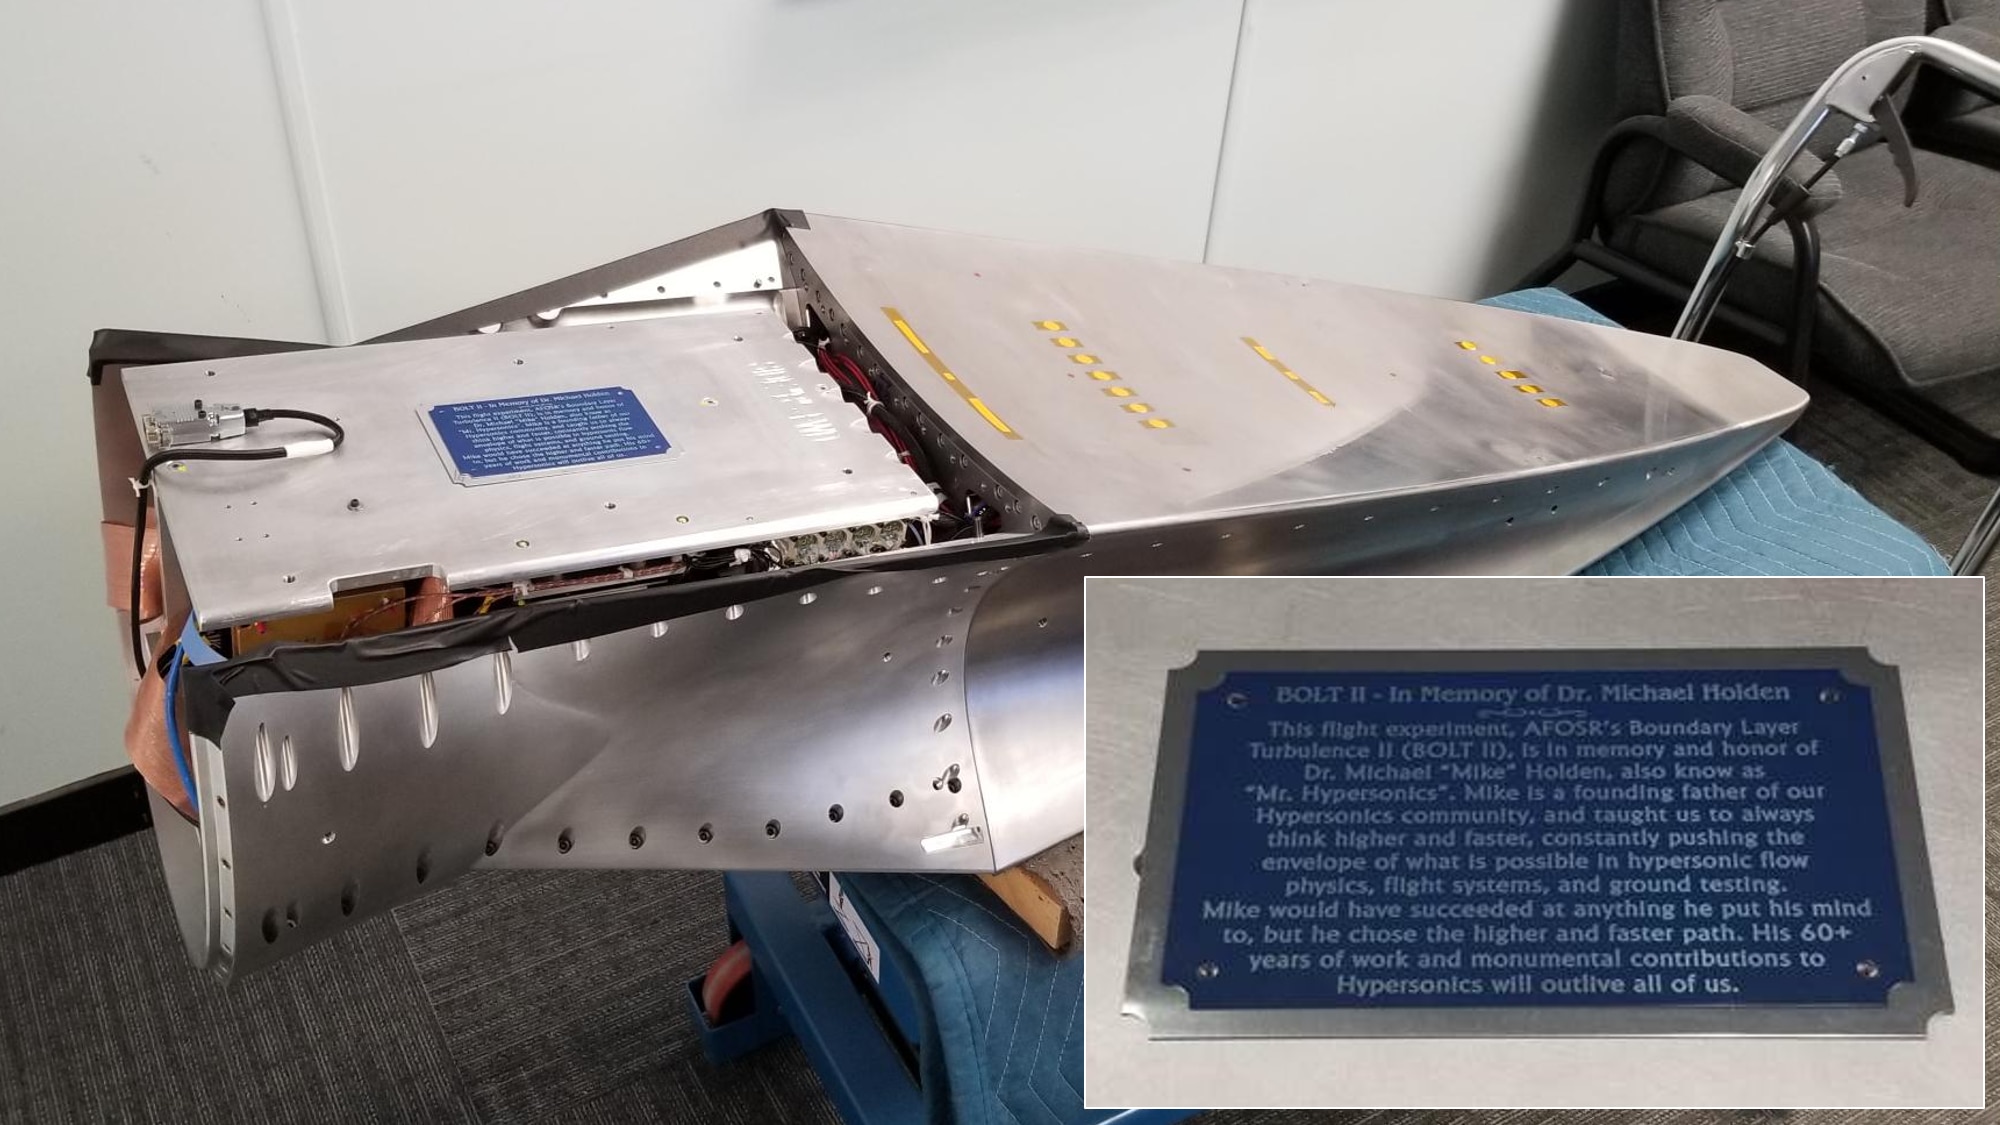 The BOLT II payload in the March 21 flight experiment will carry a plaque dedicating the flight to the late Mike Holden, who was a major contributor to the field of hypersonics. (Courtesy Photo)